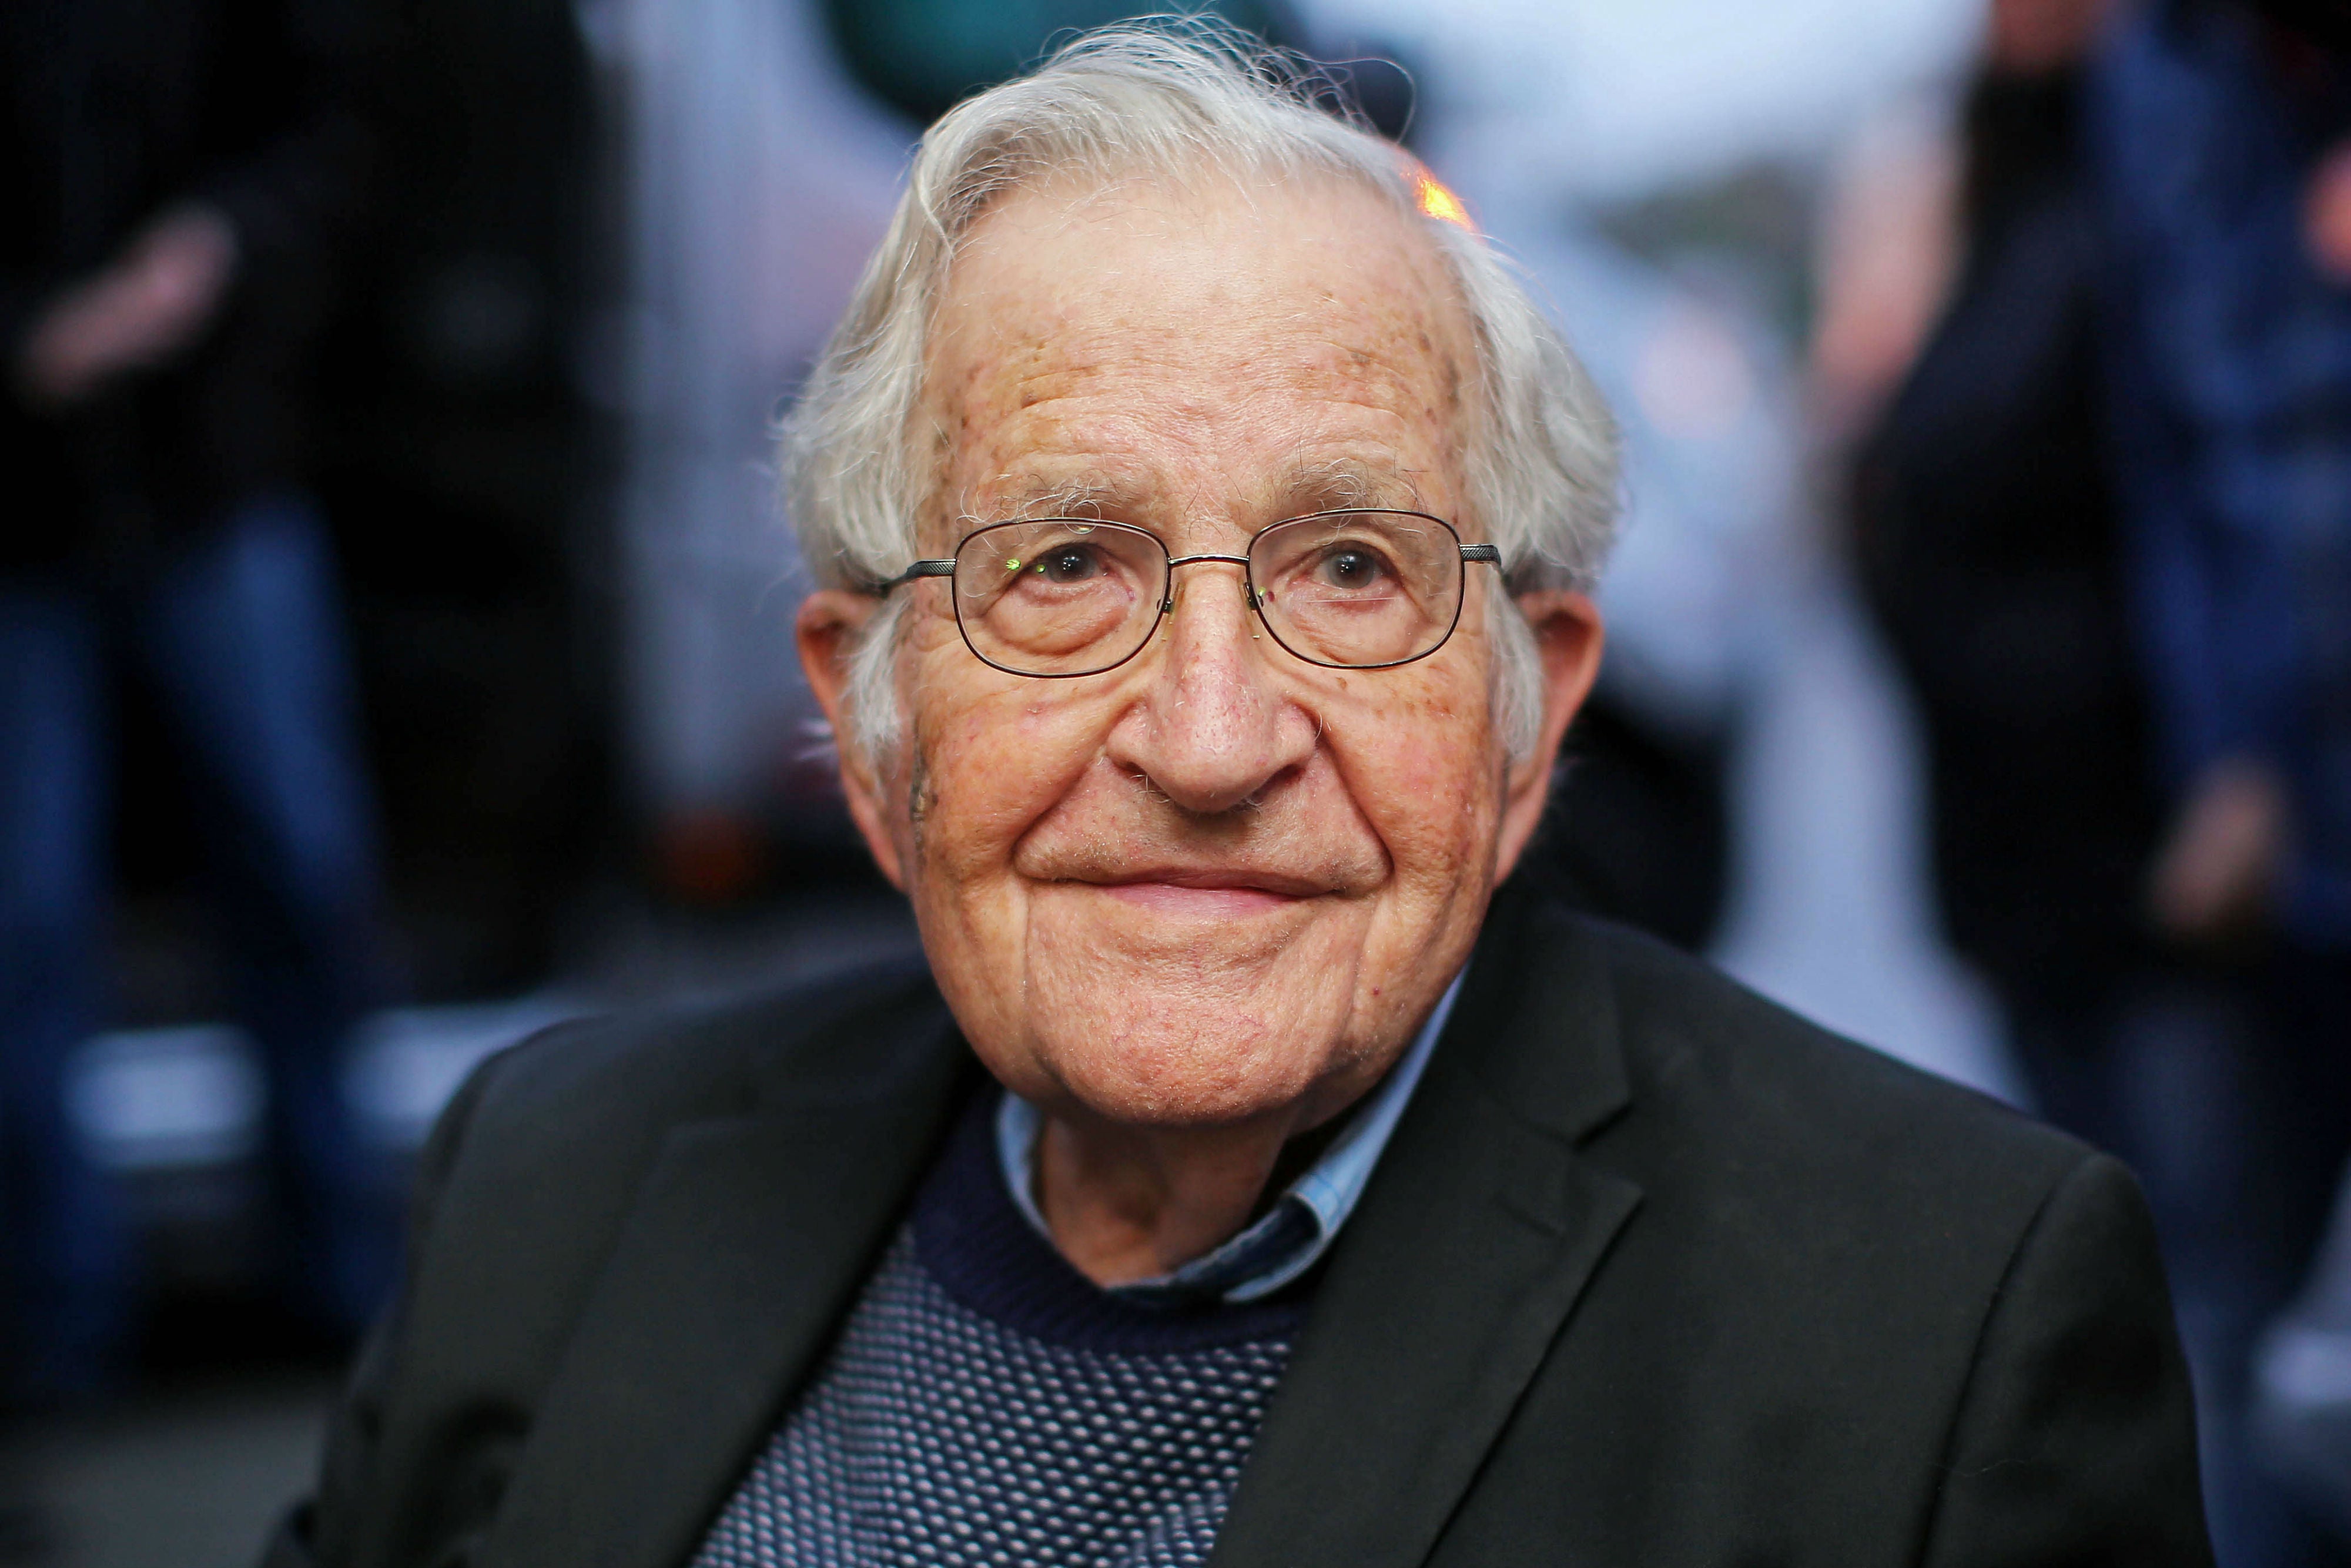 Trump represents worse threat to humanity than Hitler, claims Chomsky